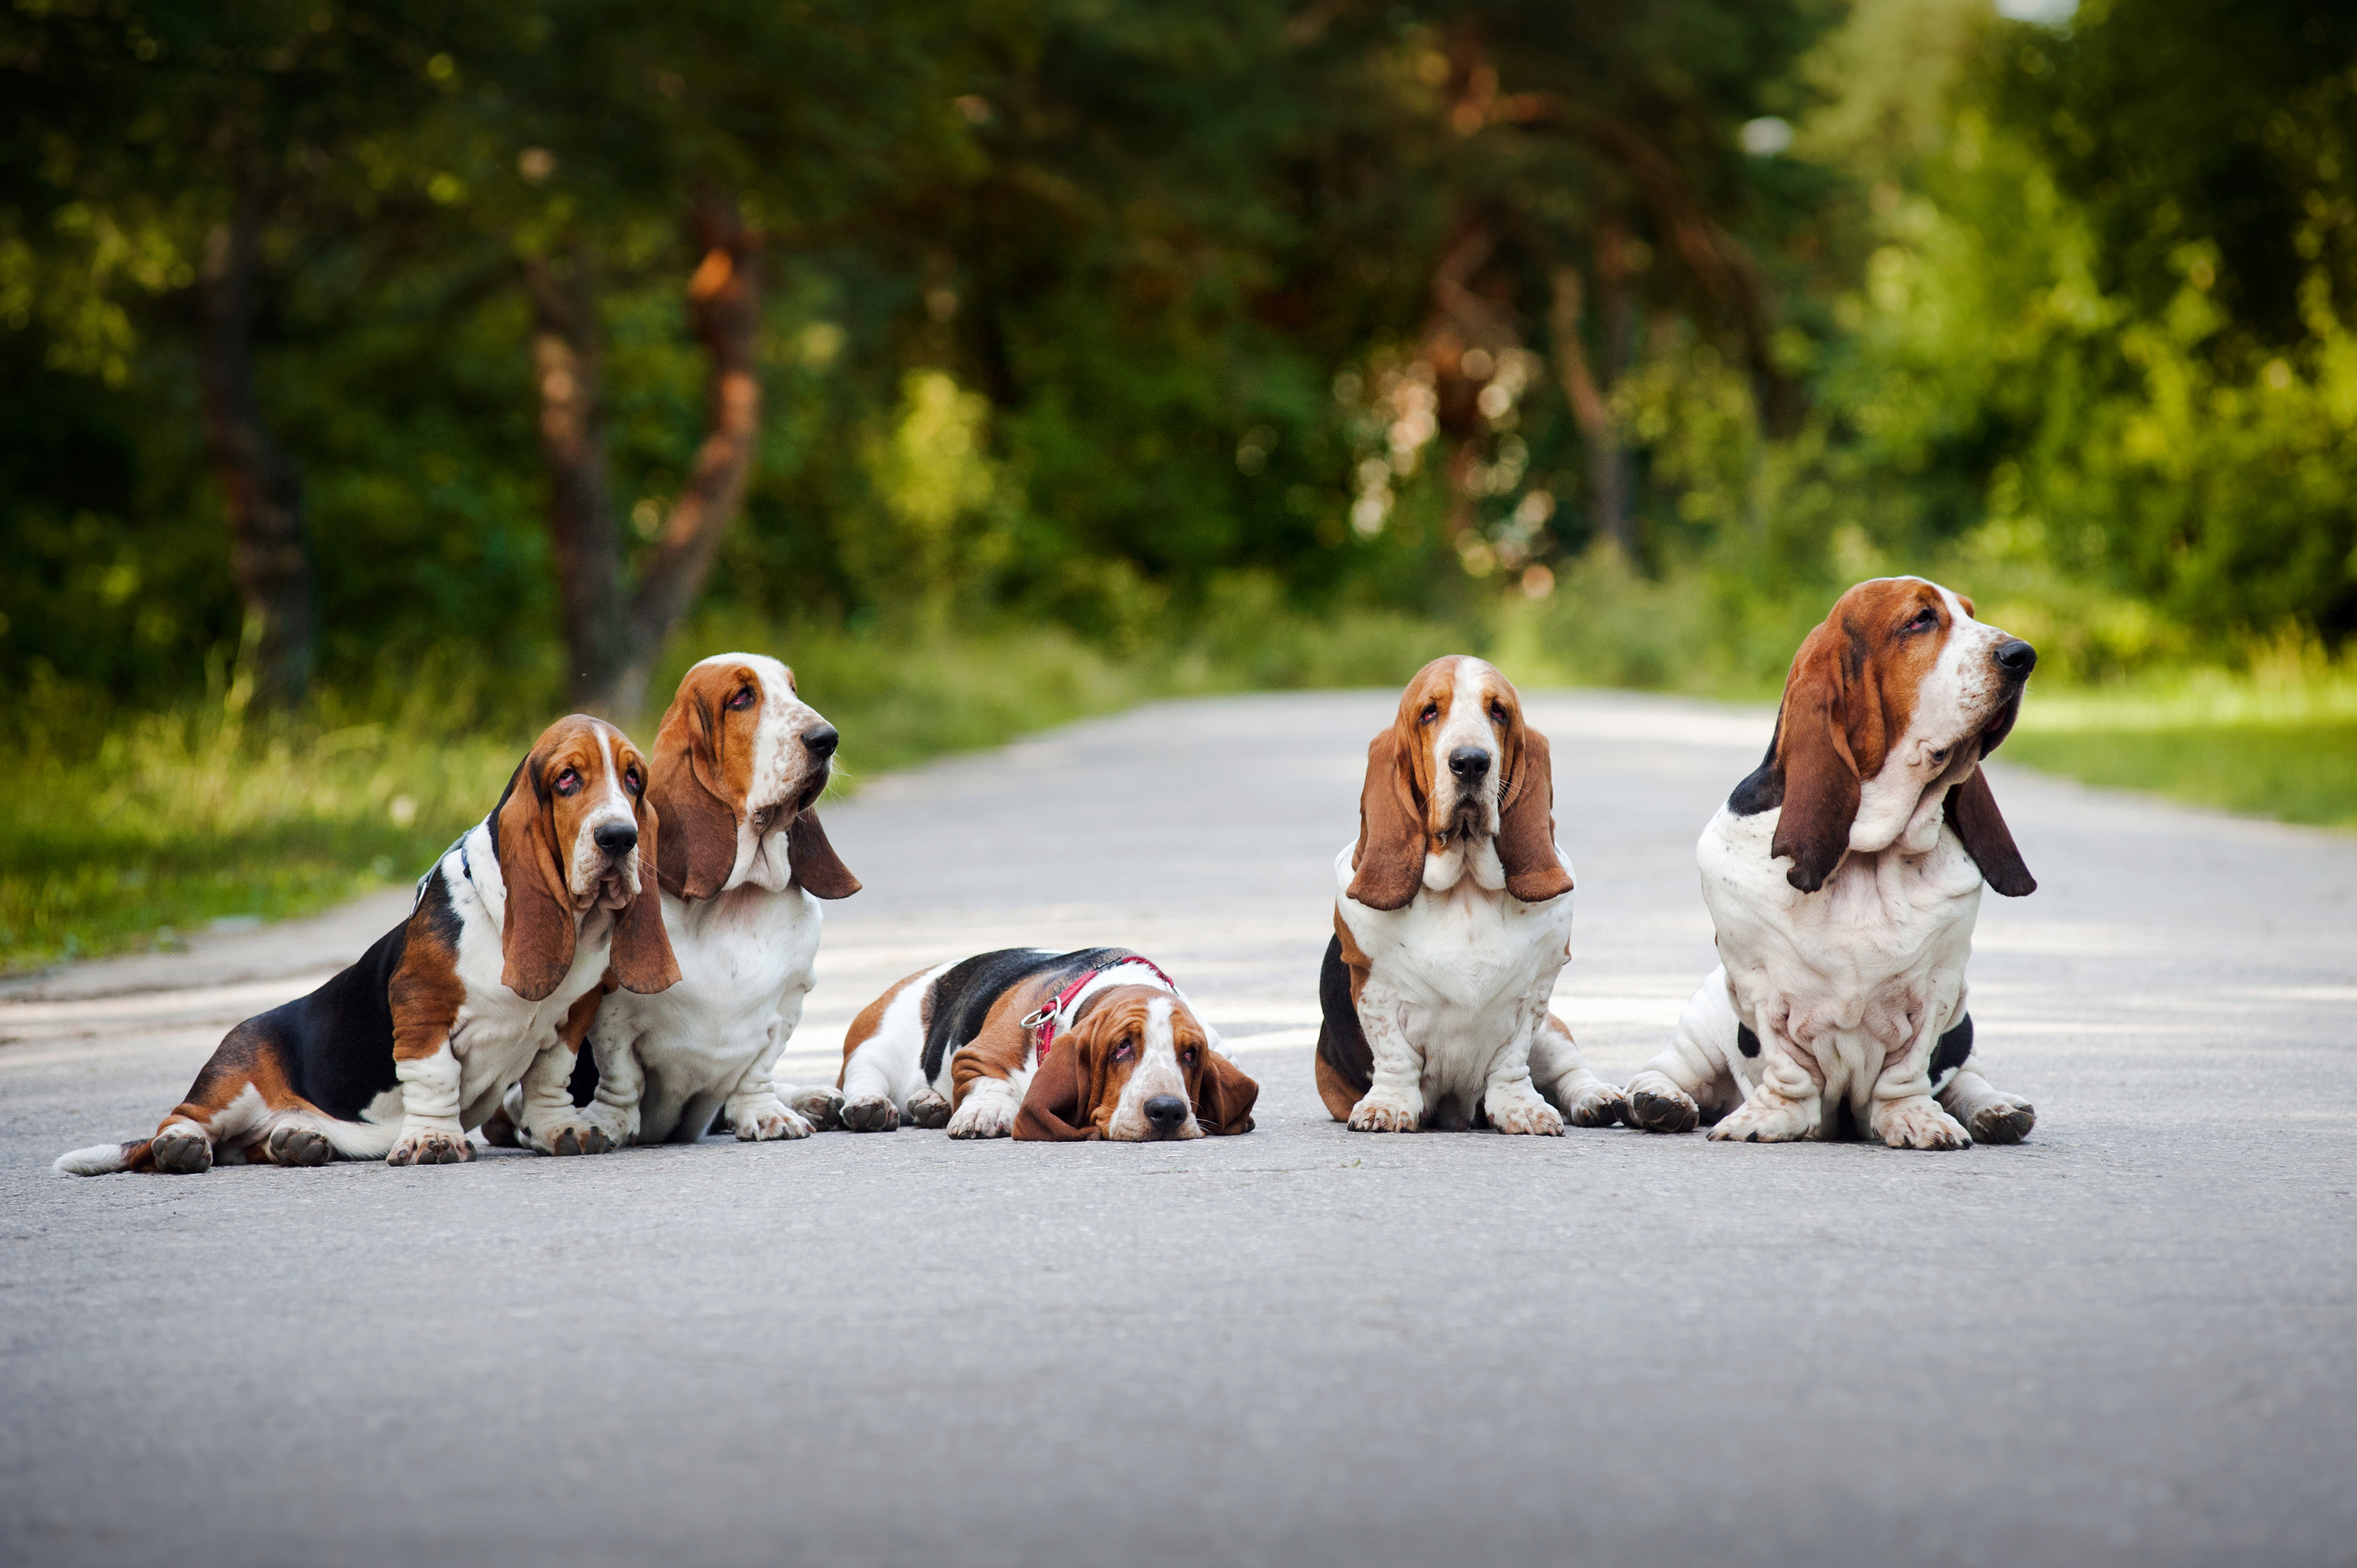 Animals___Dogs_Family_Basset_Hound_sitting_on_the_road_049589_.jpg